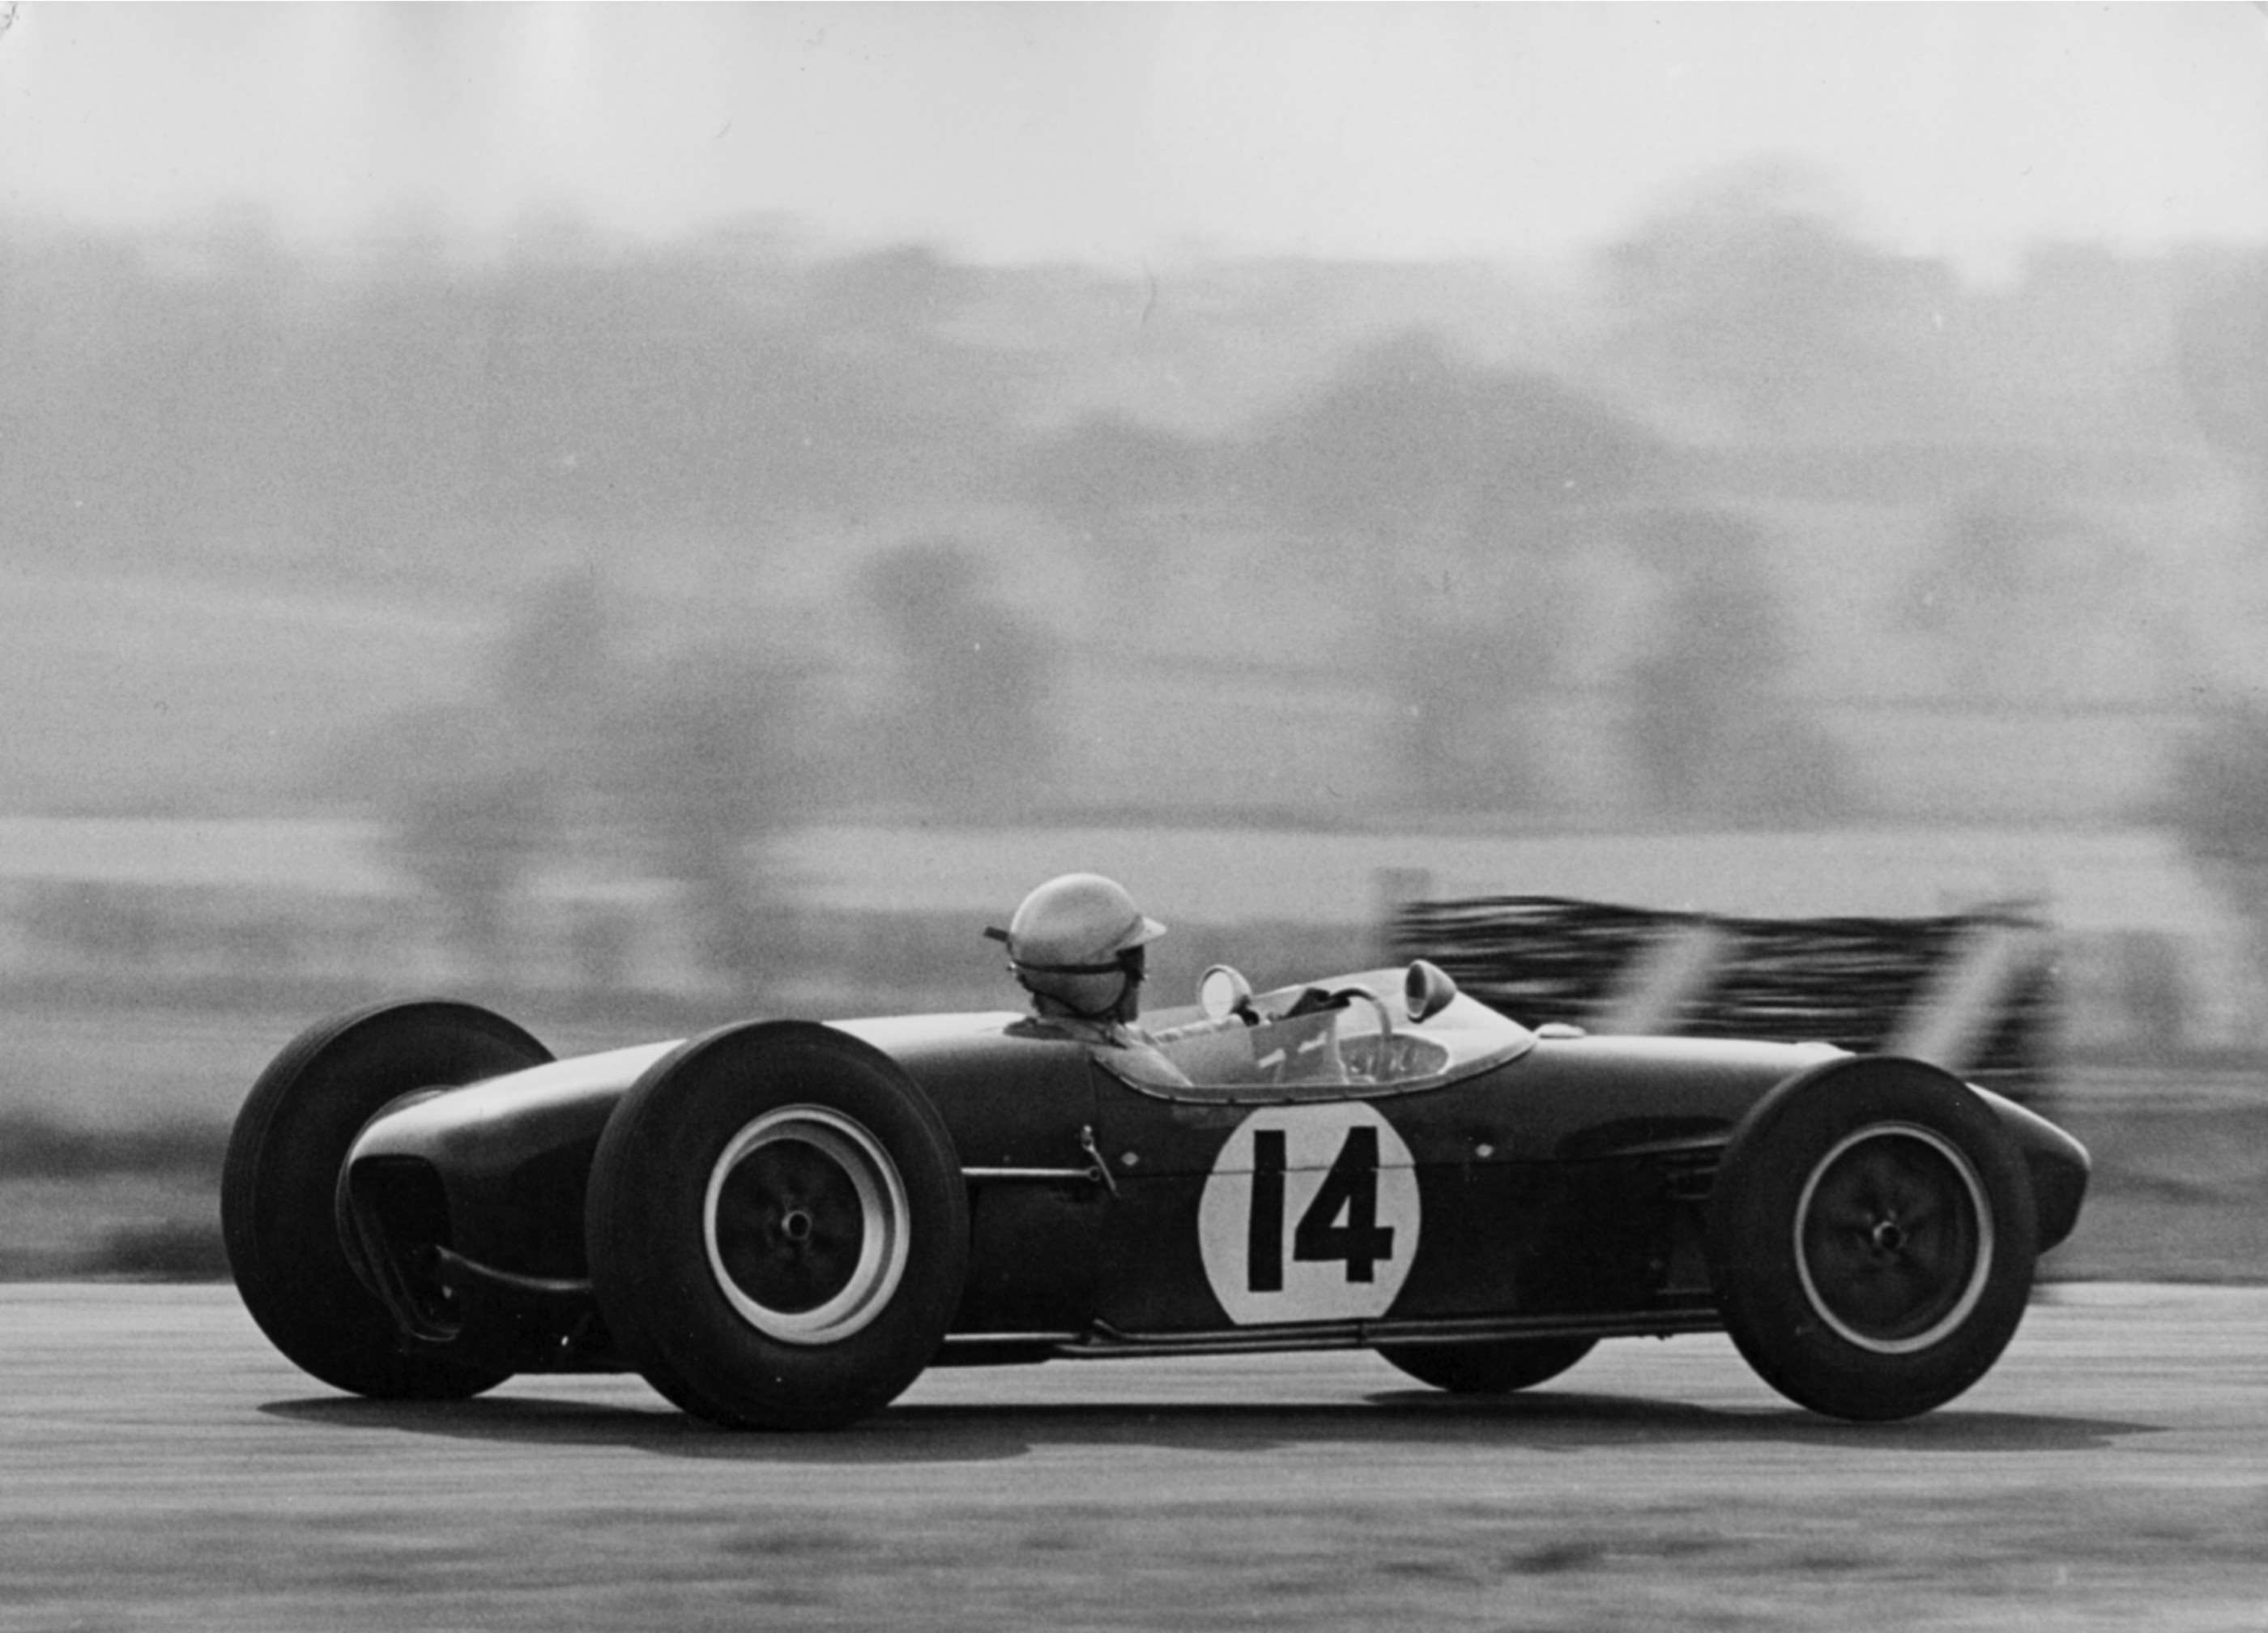 Catch me if you can!  Innes Ireland at full chat in the works Lotus-Climax 18 - Easter Monday 1960 - when he beat Moss’s Cooper in both Formula 1 and Formula 2 races…